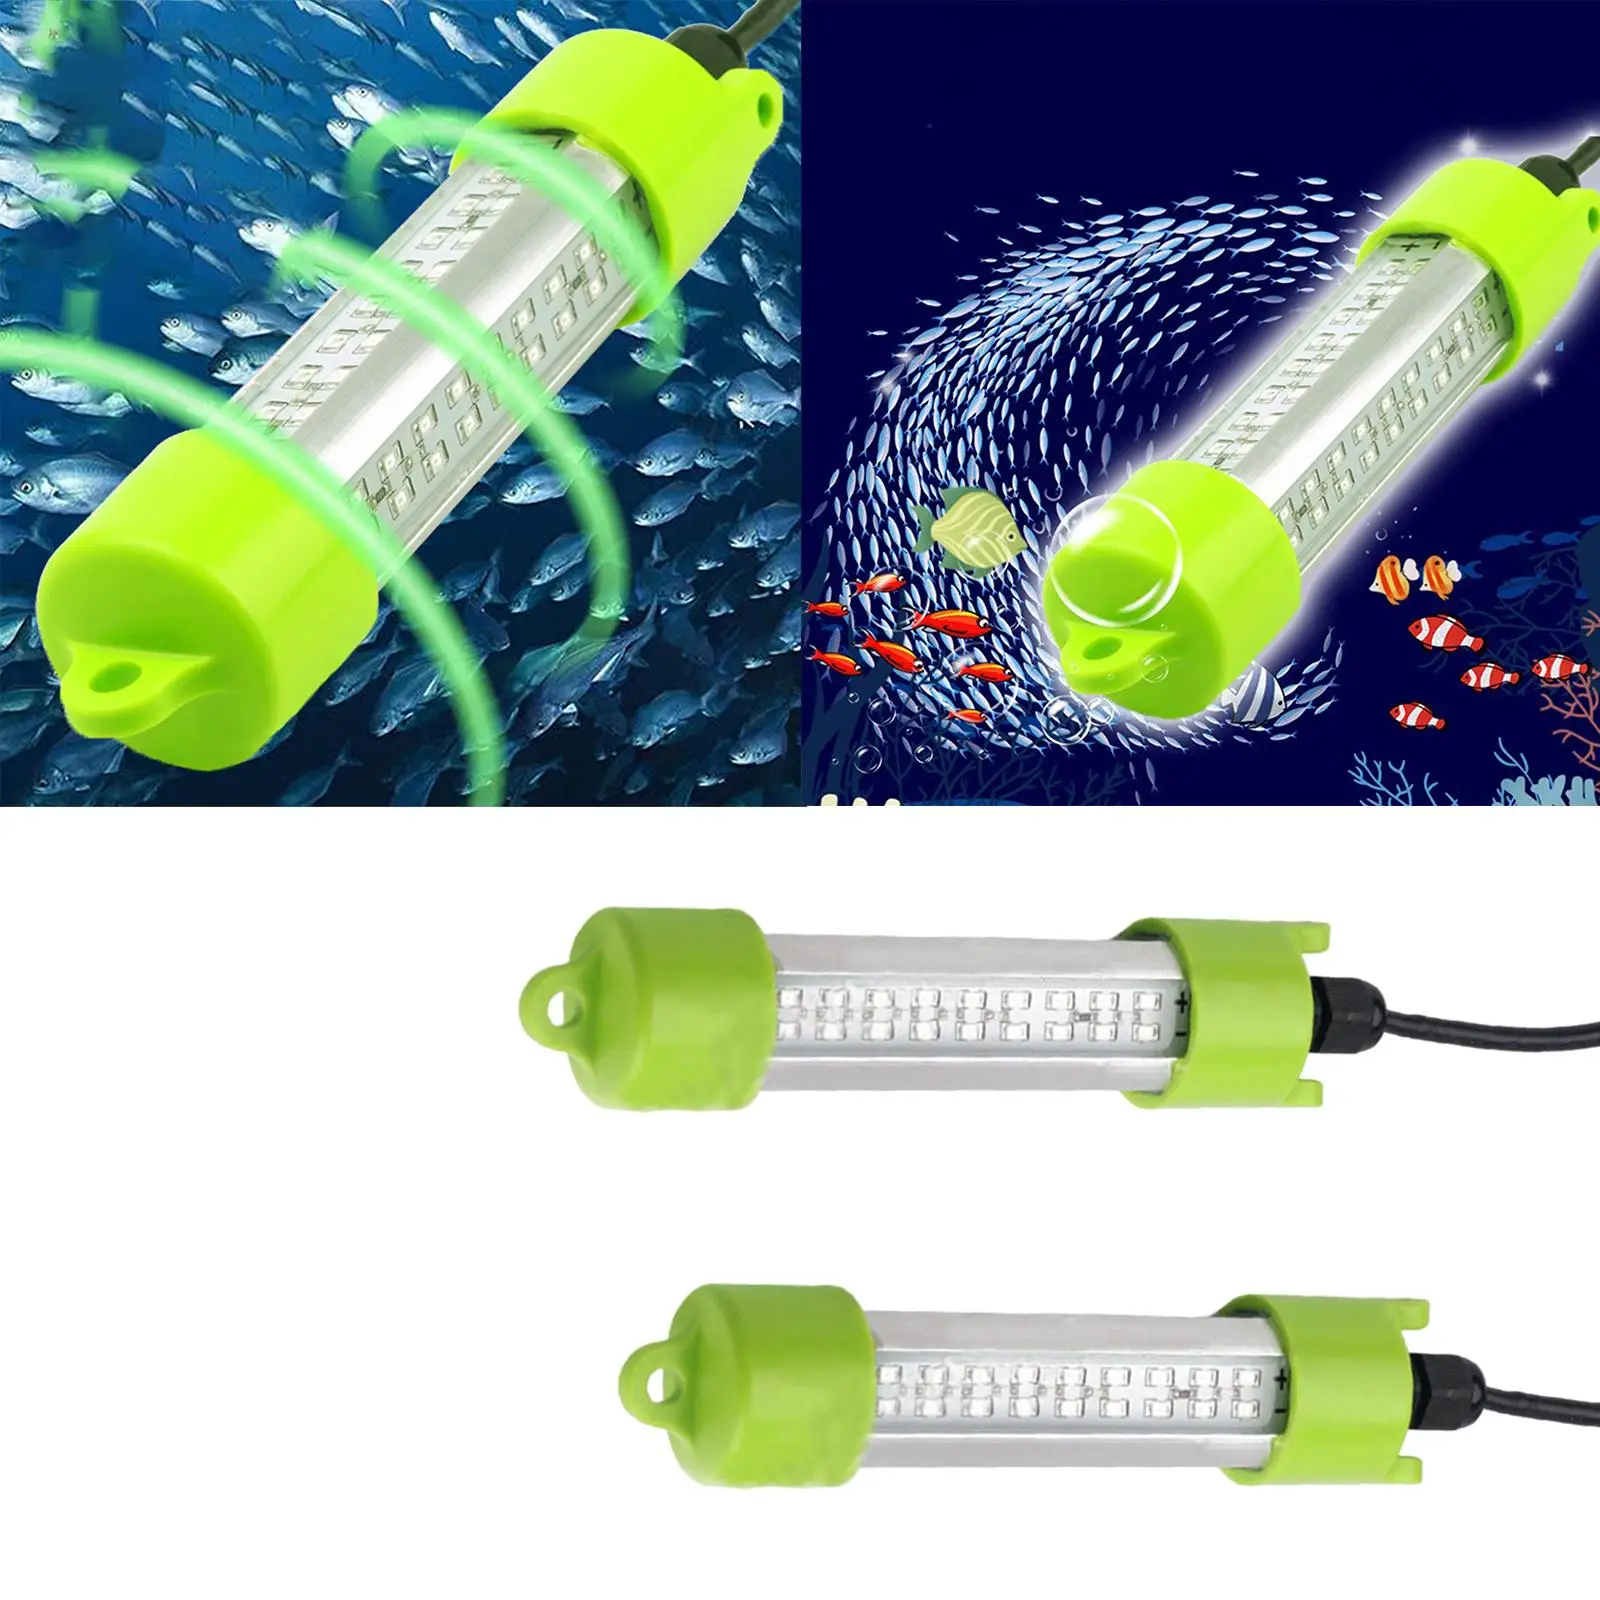 High Power 72 LEDs Submersible Fishing Light Lure Bait Lamp for Attracting Bait Lures Fish Attracter Underwater Fishing Light